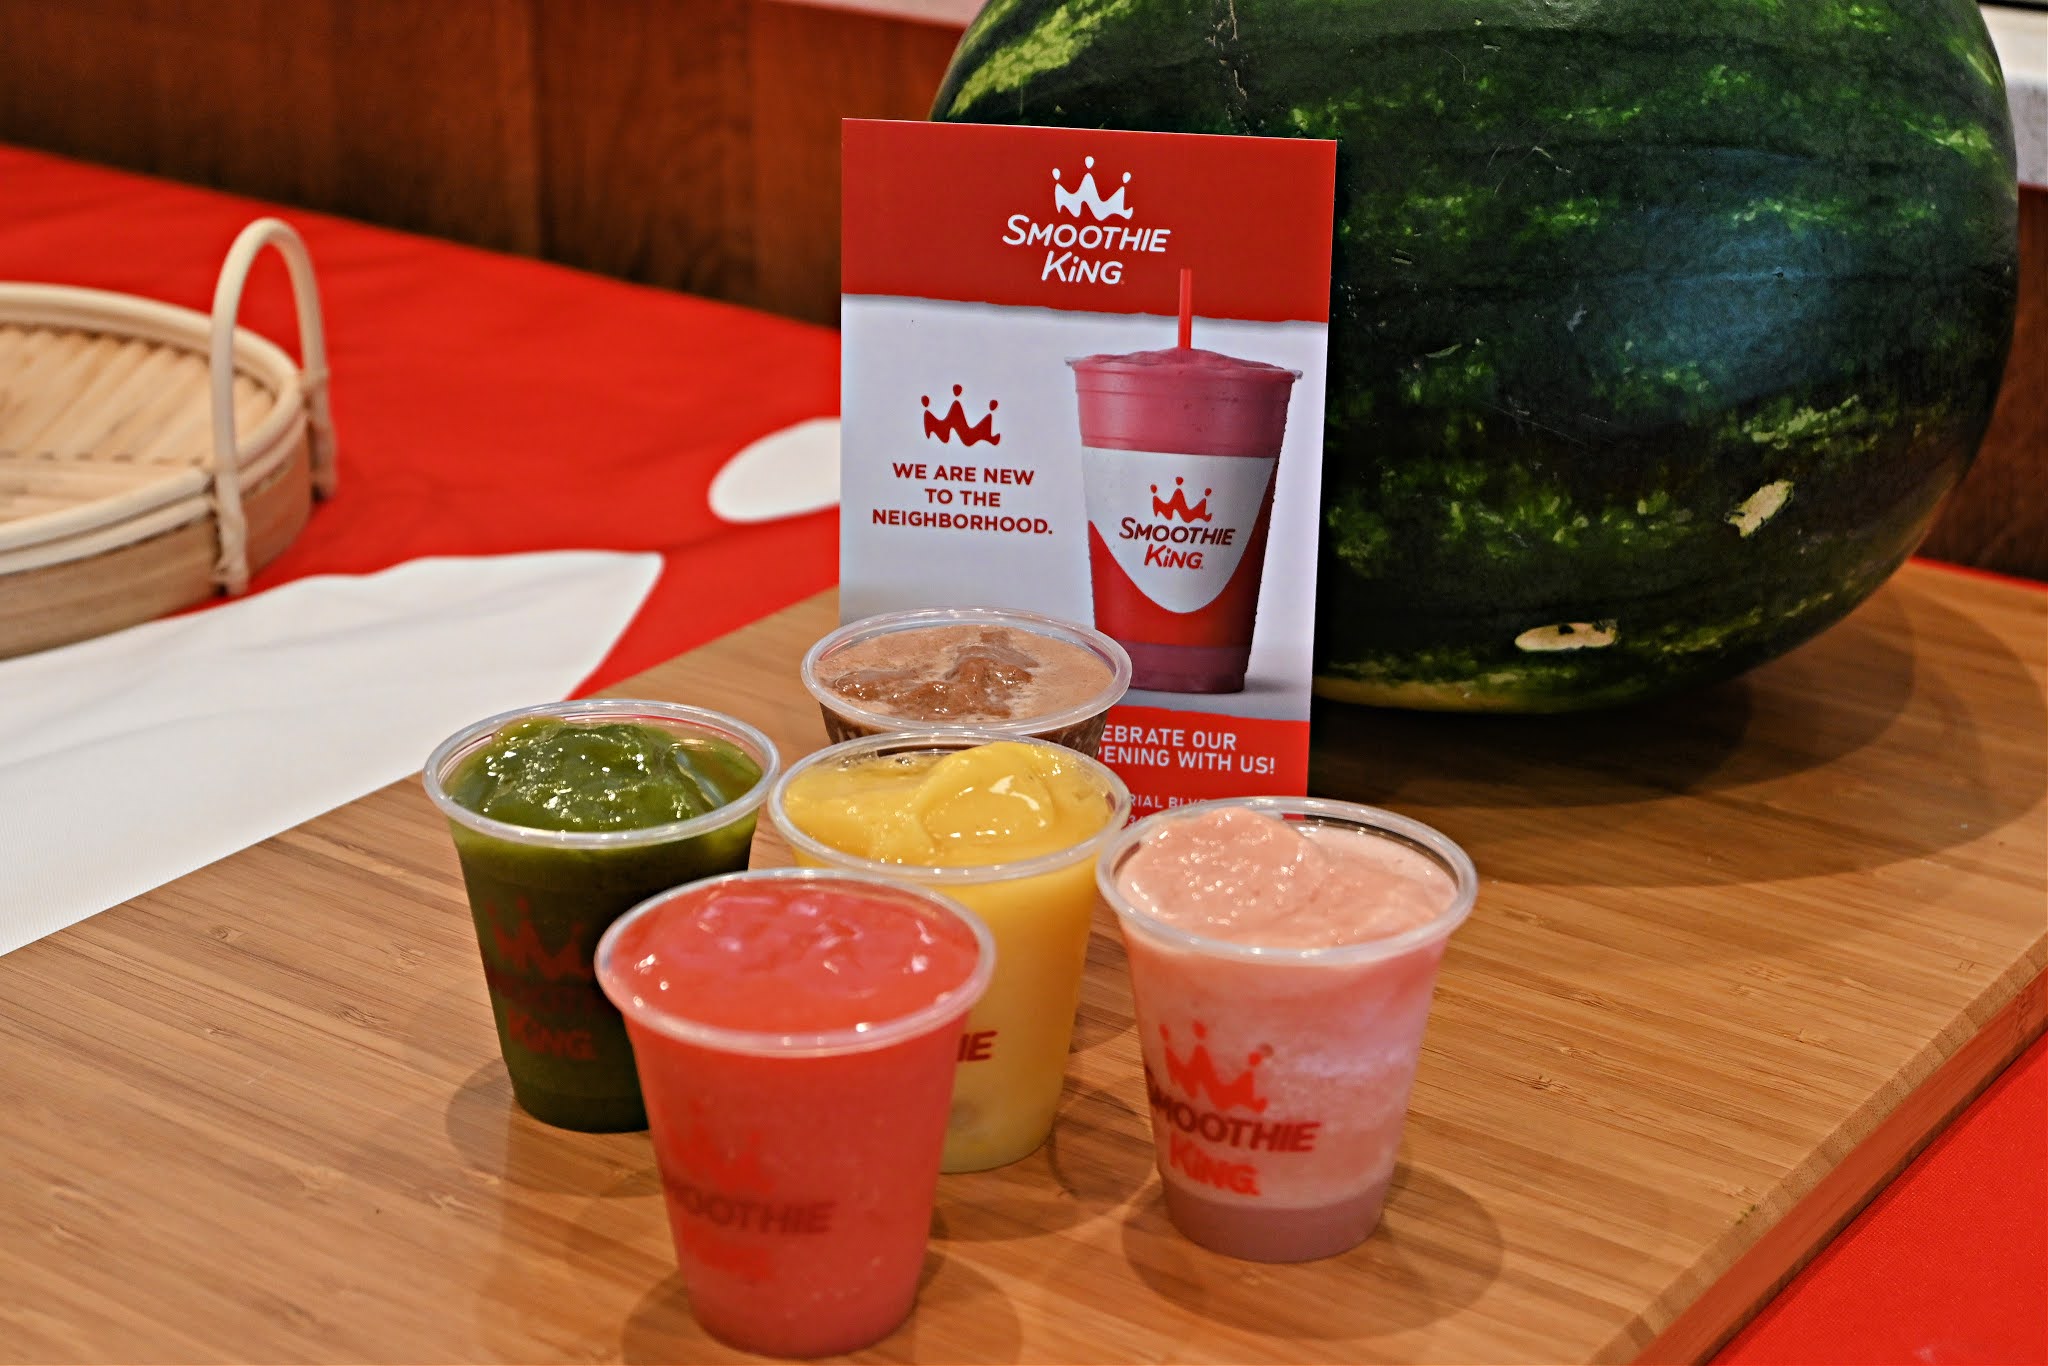 Trying out the New Clean Blend Smoothies at Smoothie King